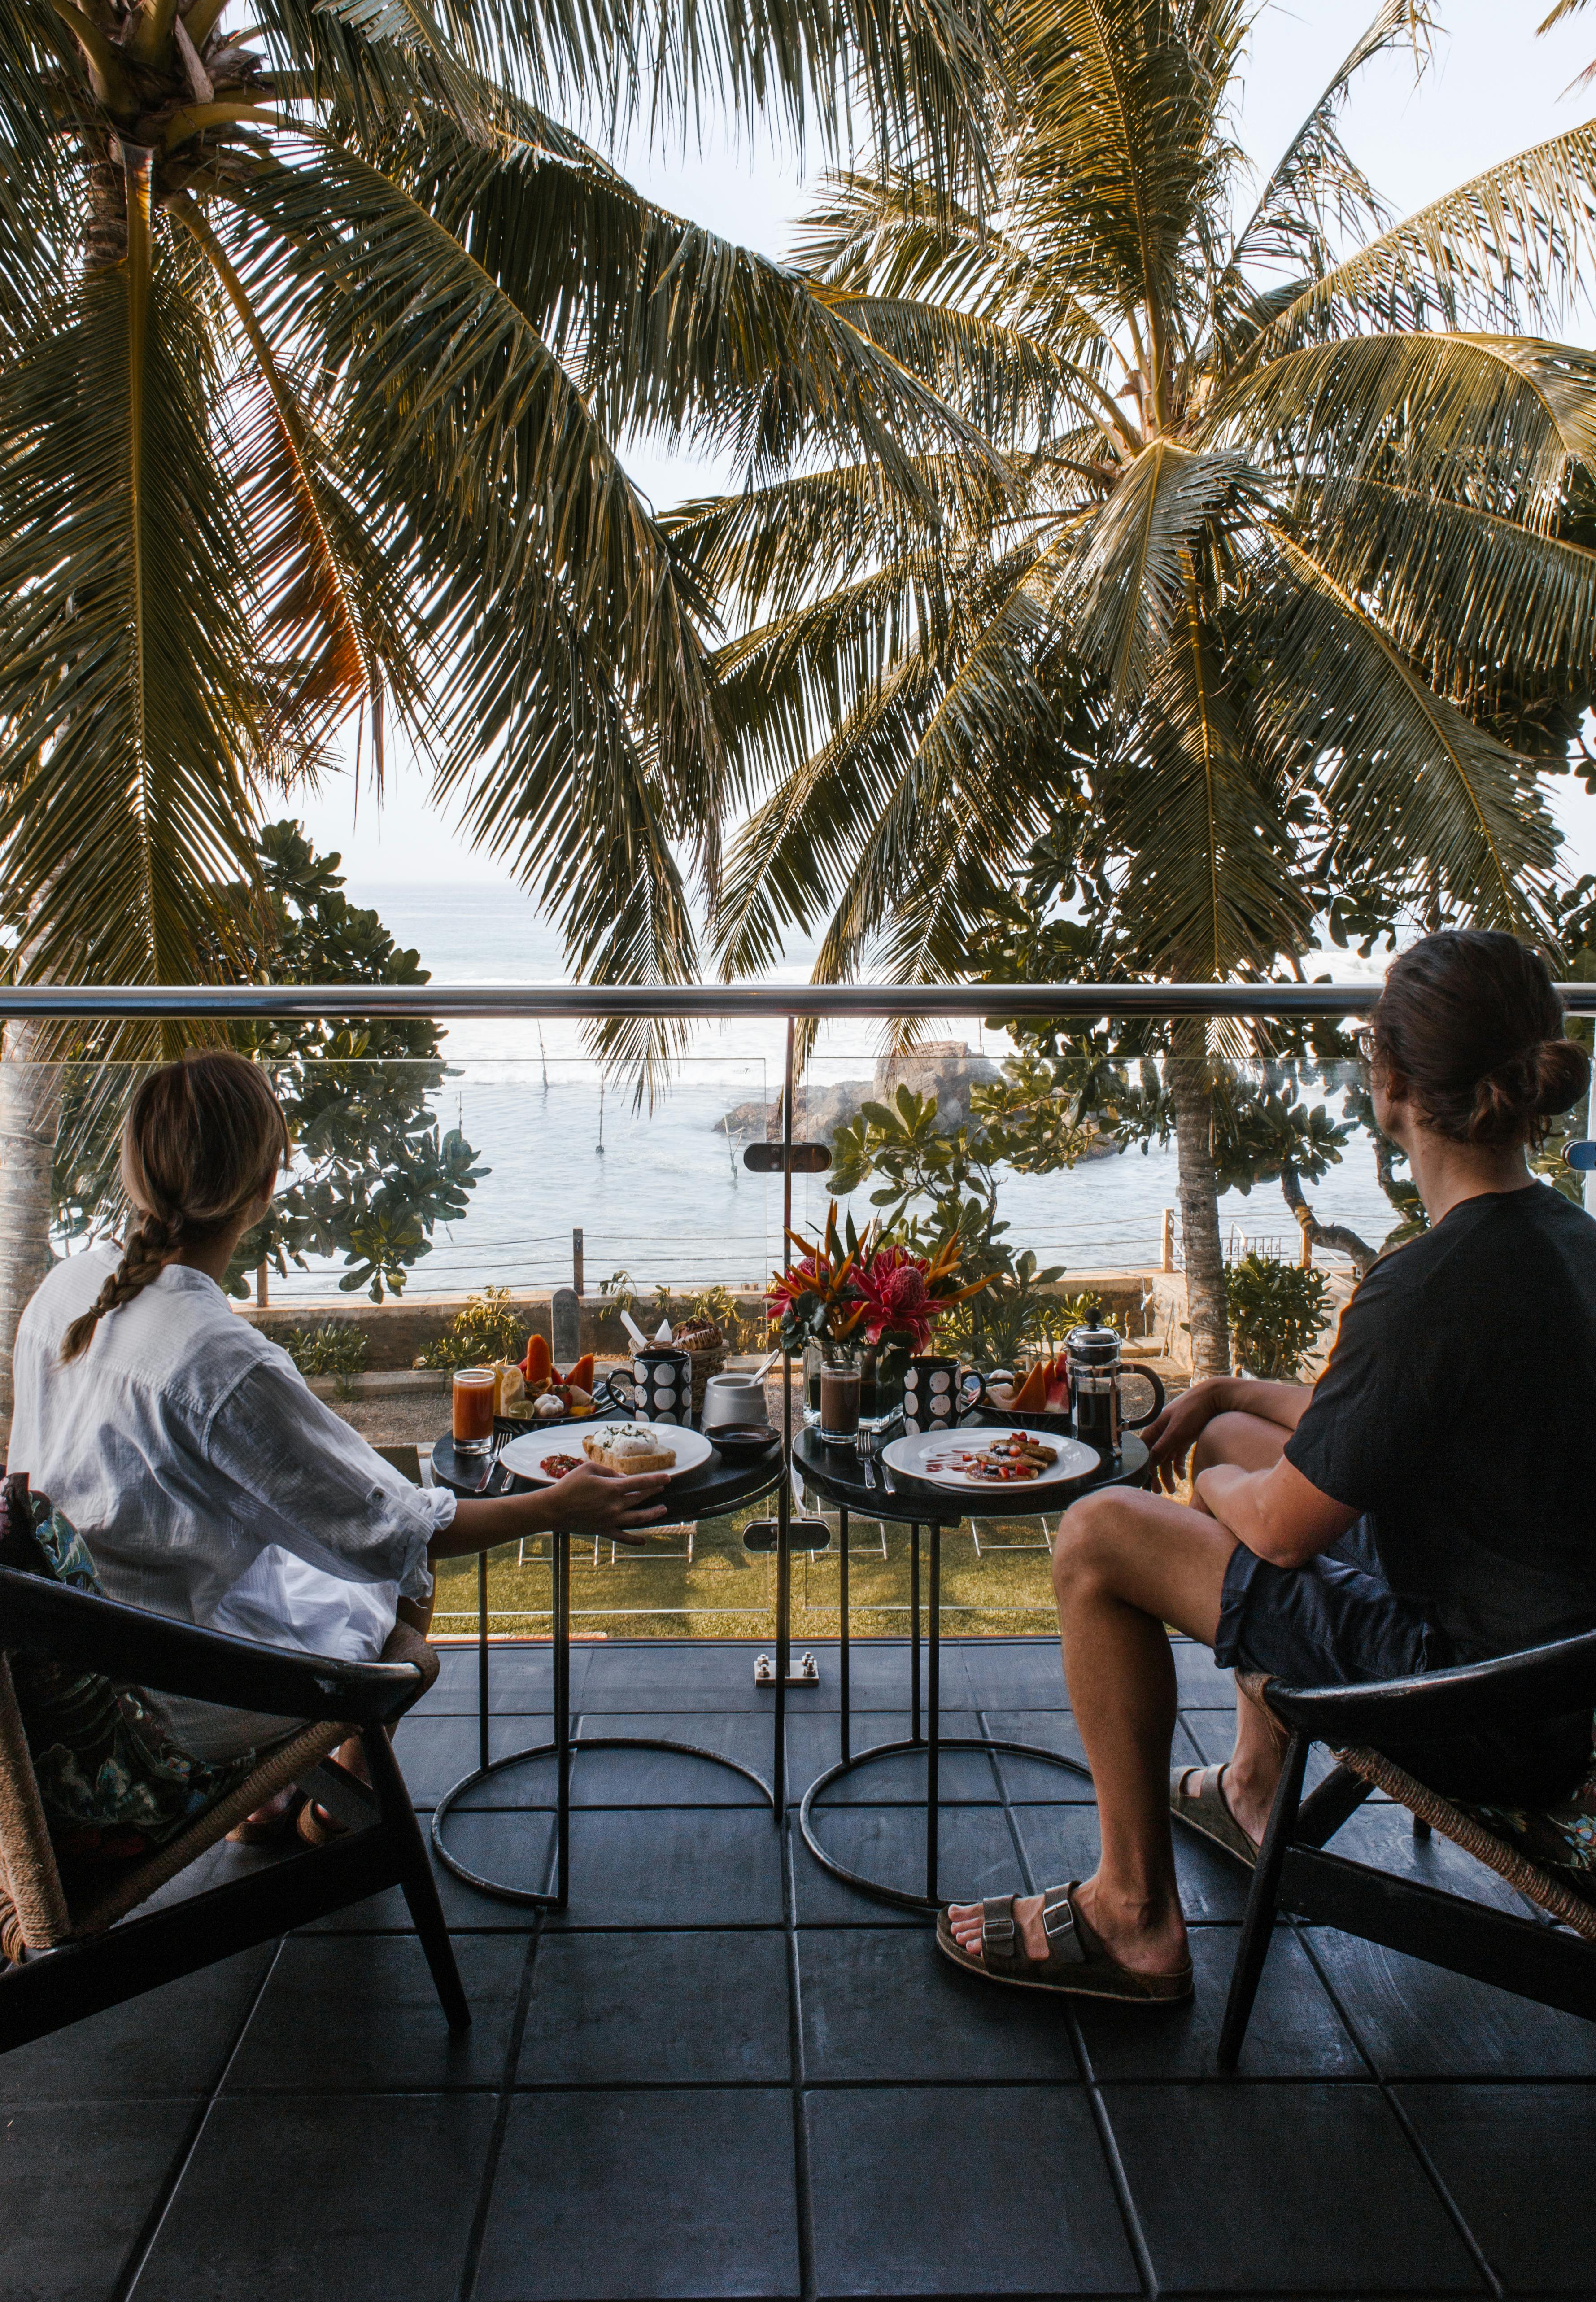 A man and woman enjoying the view and a meal during a romantic getaway | Source: Pexels